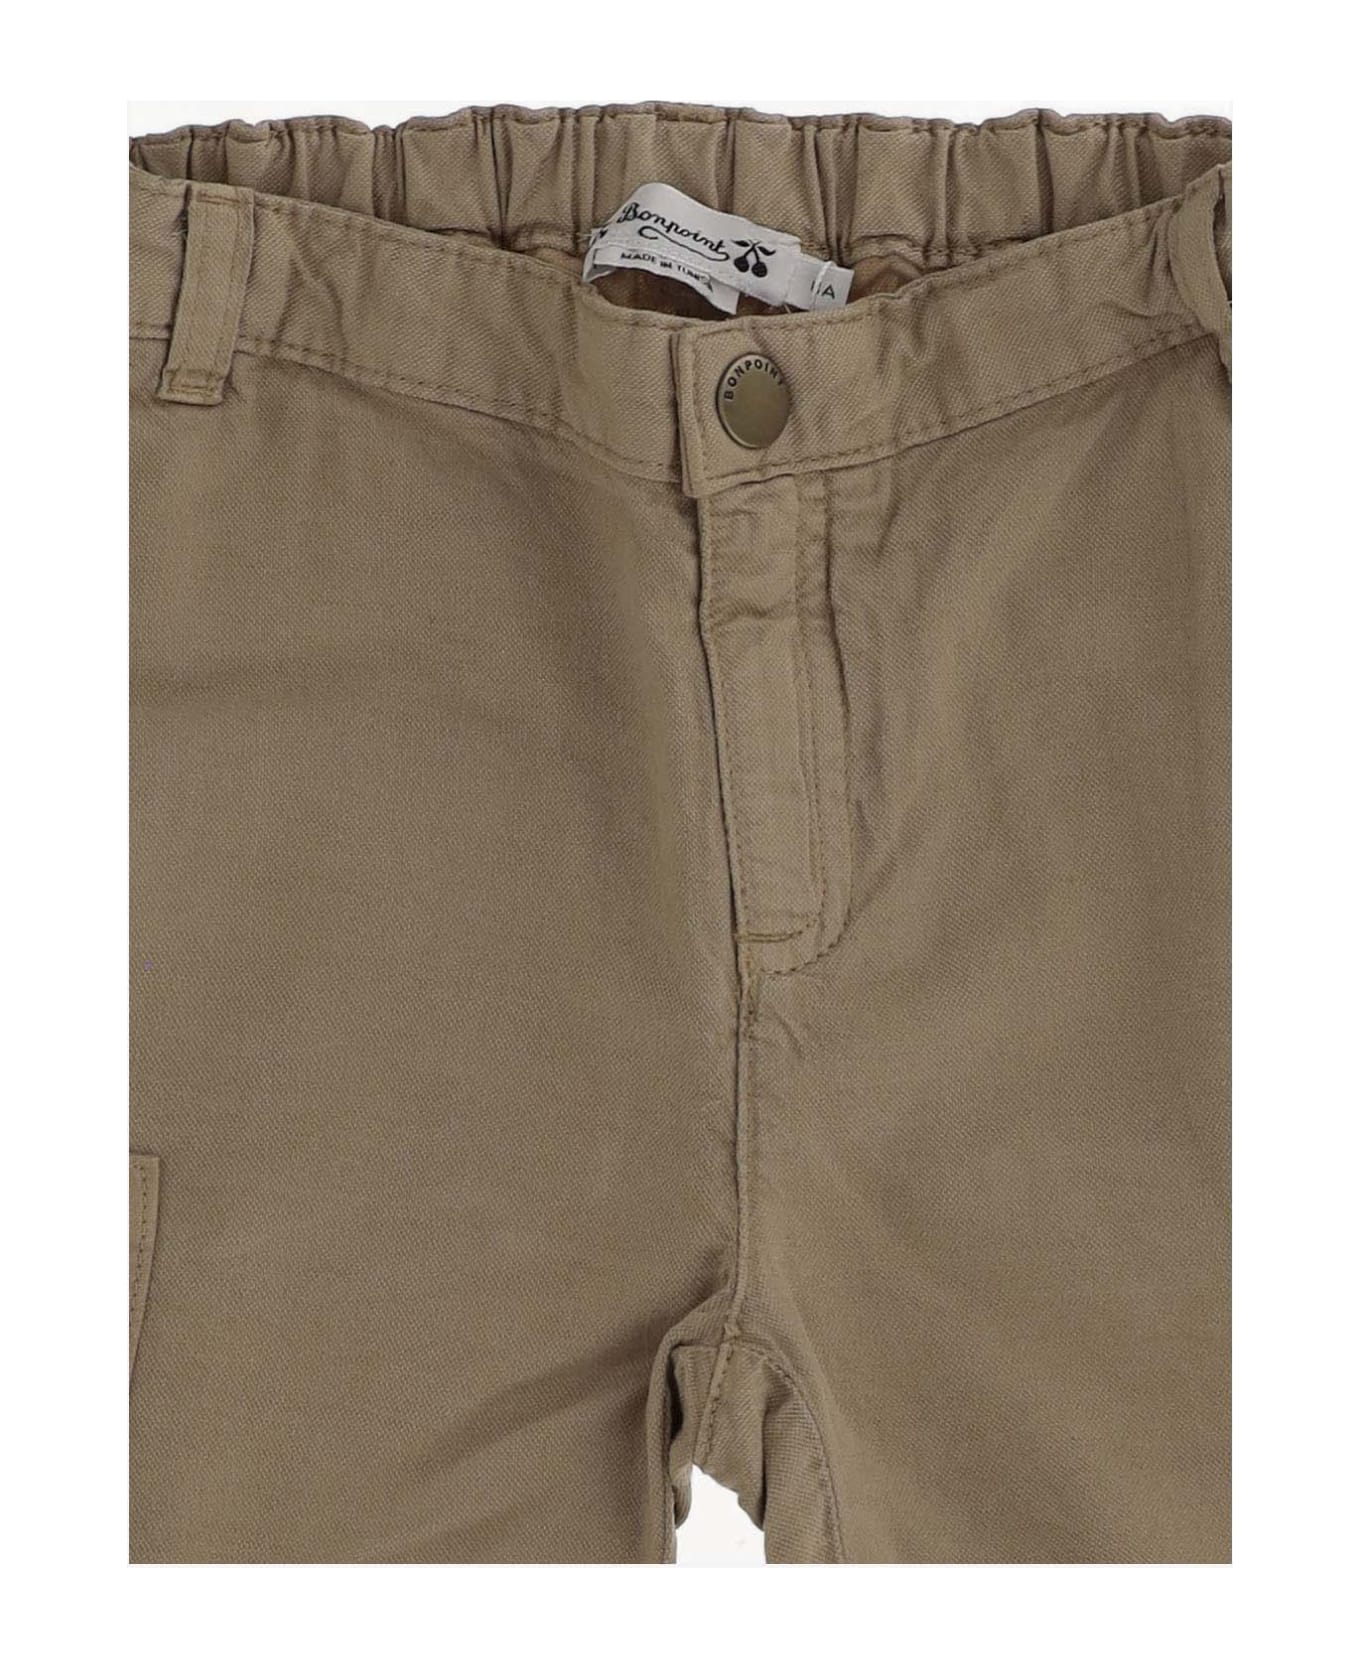 Bonpoint Lyocell Blend Shorts - Brown ボトムス